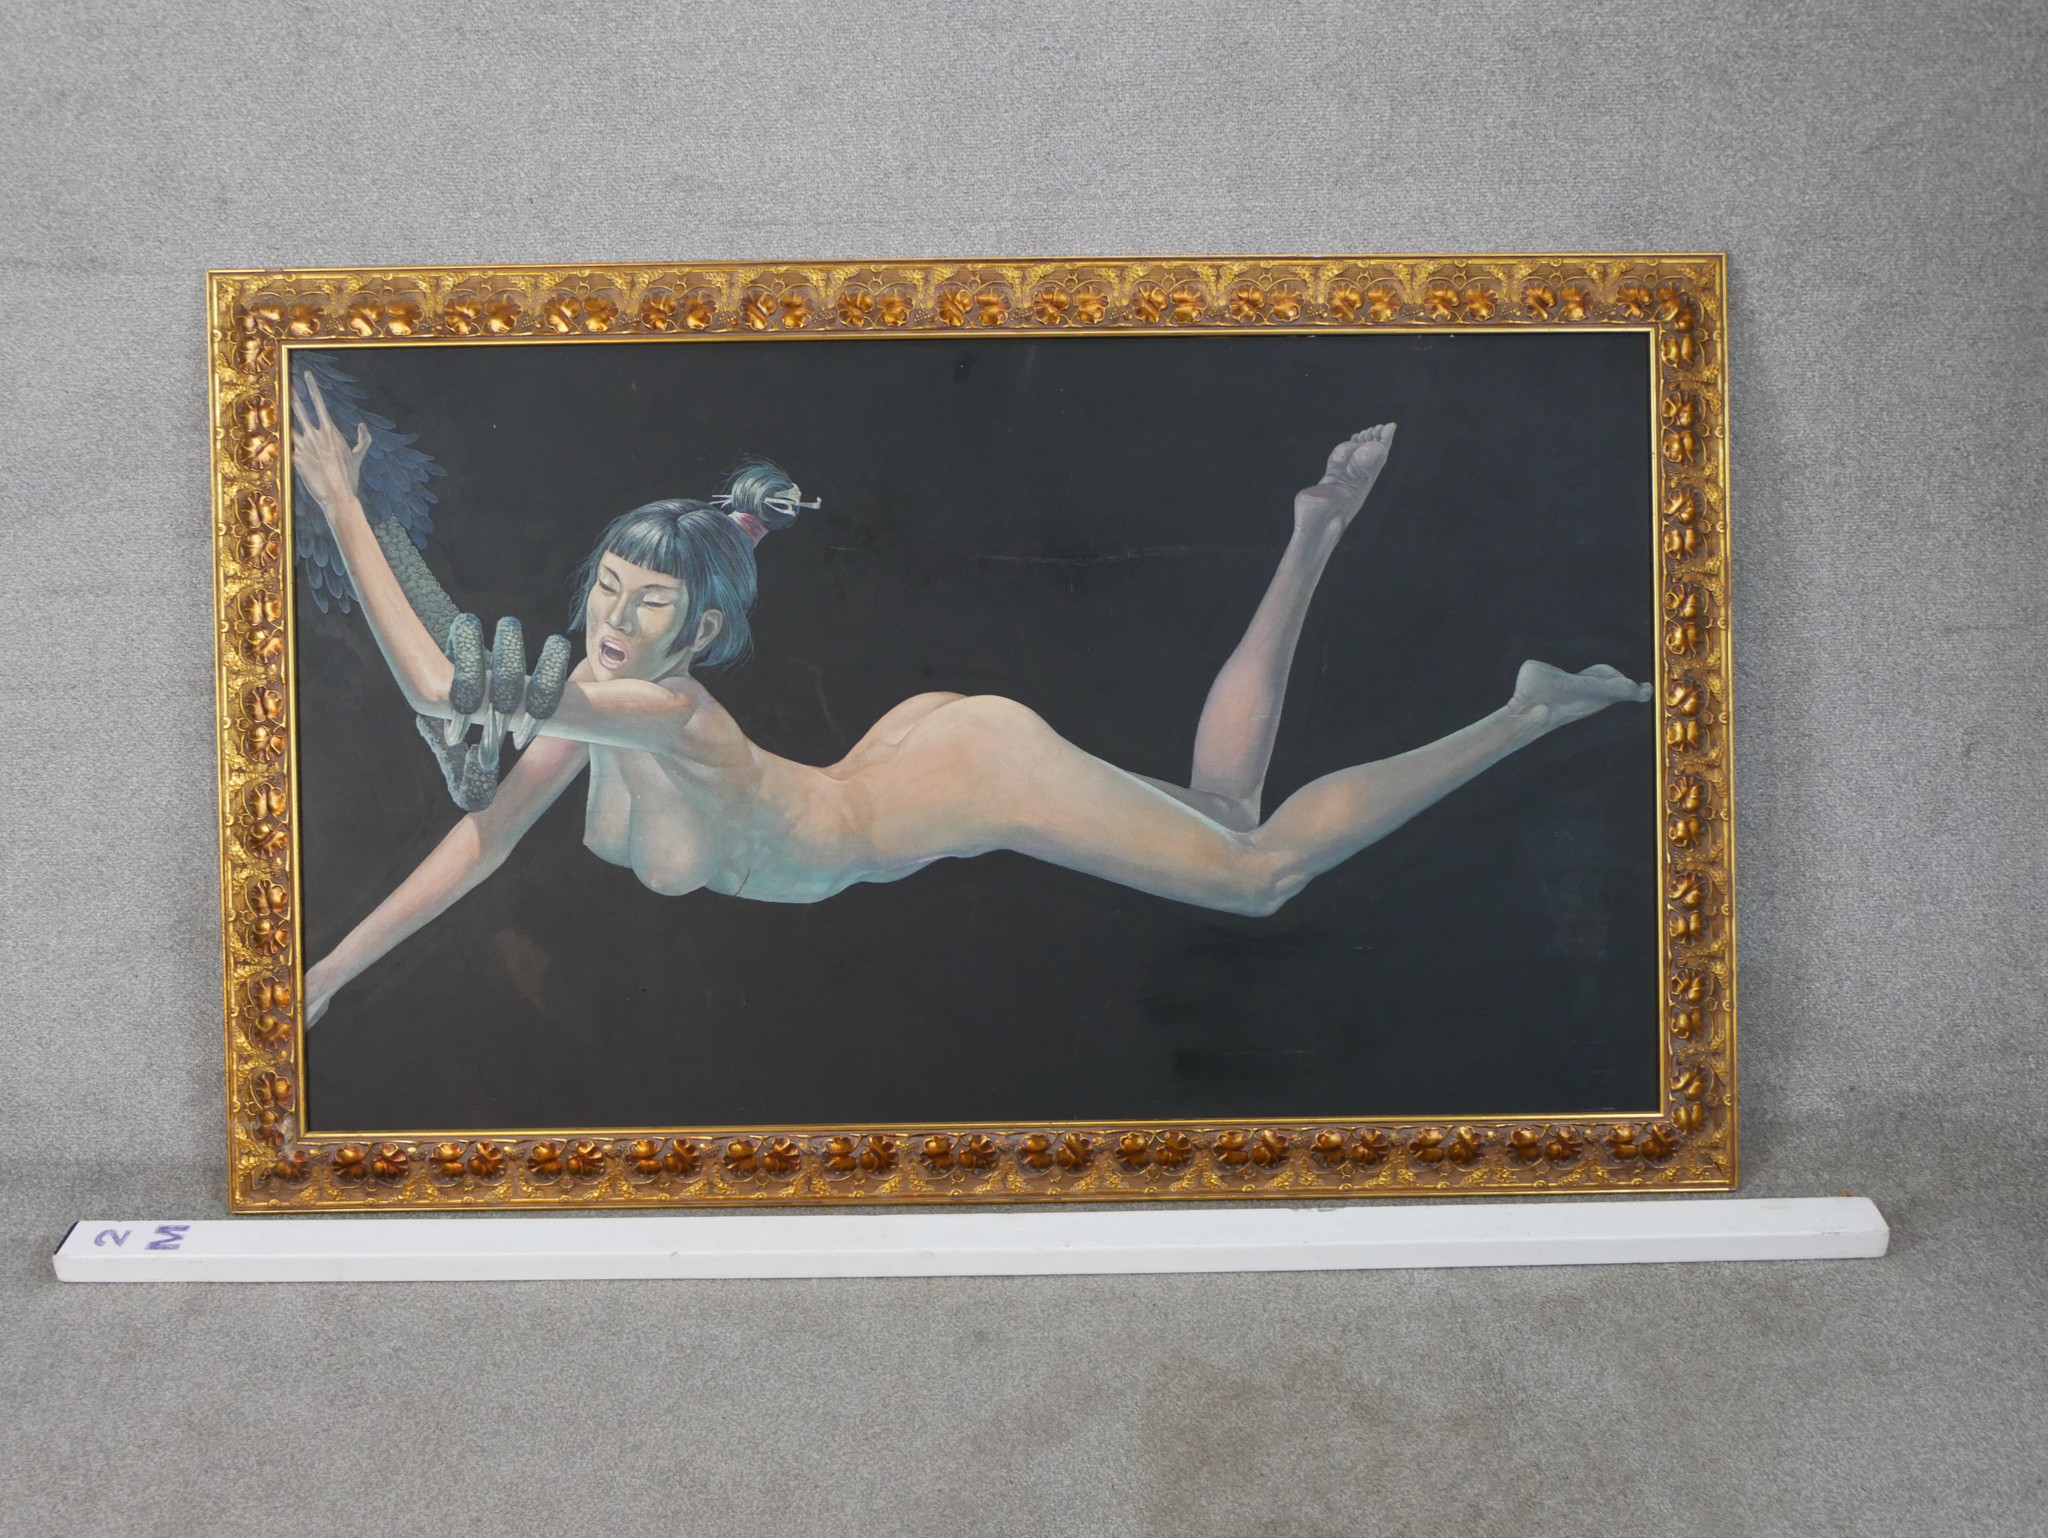 20th century, Thai inspired nude female, with serpent crawling on her arm, oil on canvas, signed and - Image 3 of 7